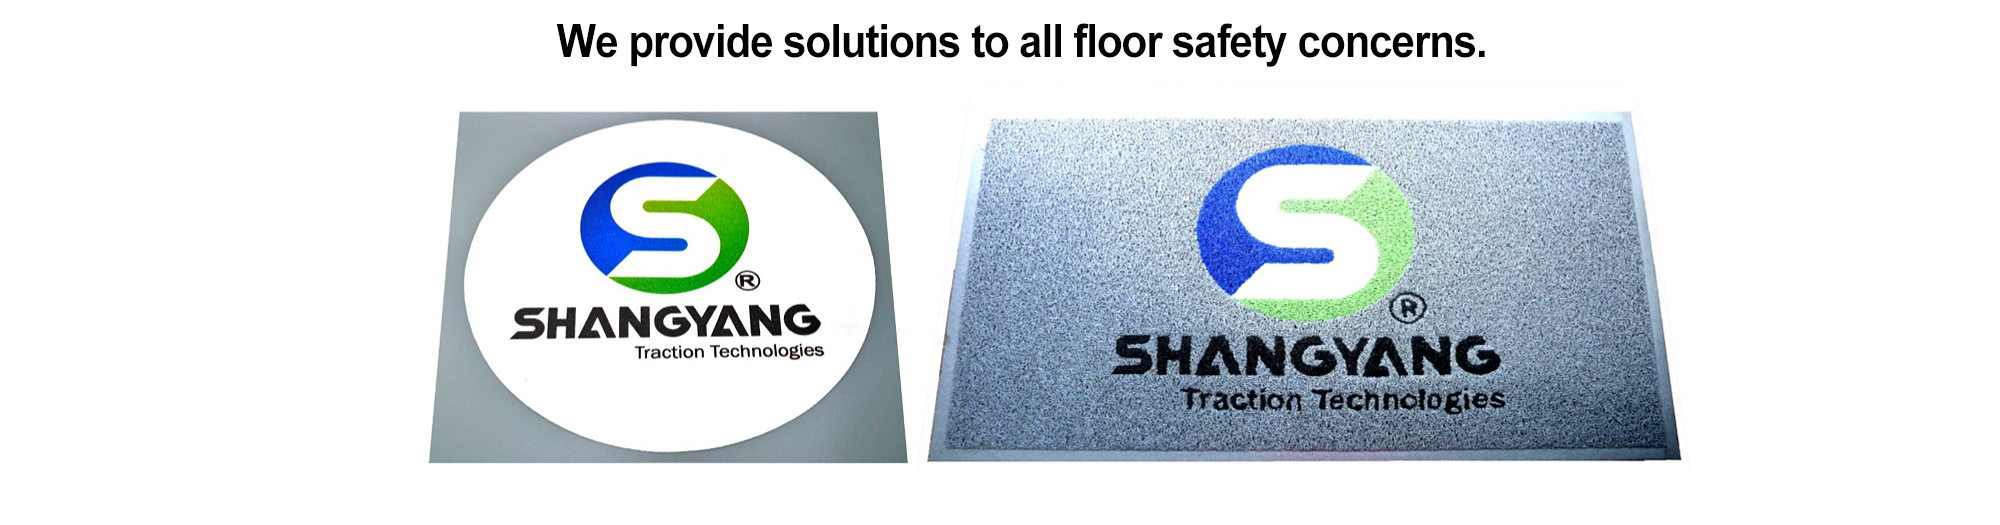 Shangyang Traction Technologies